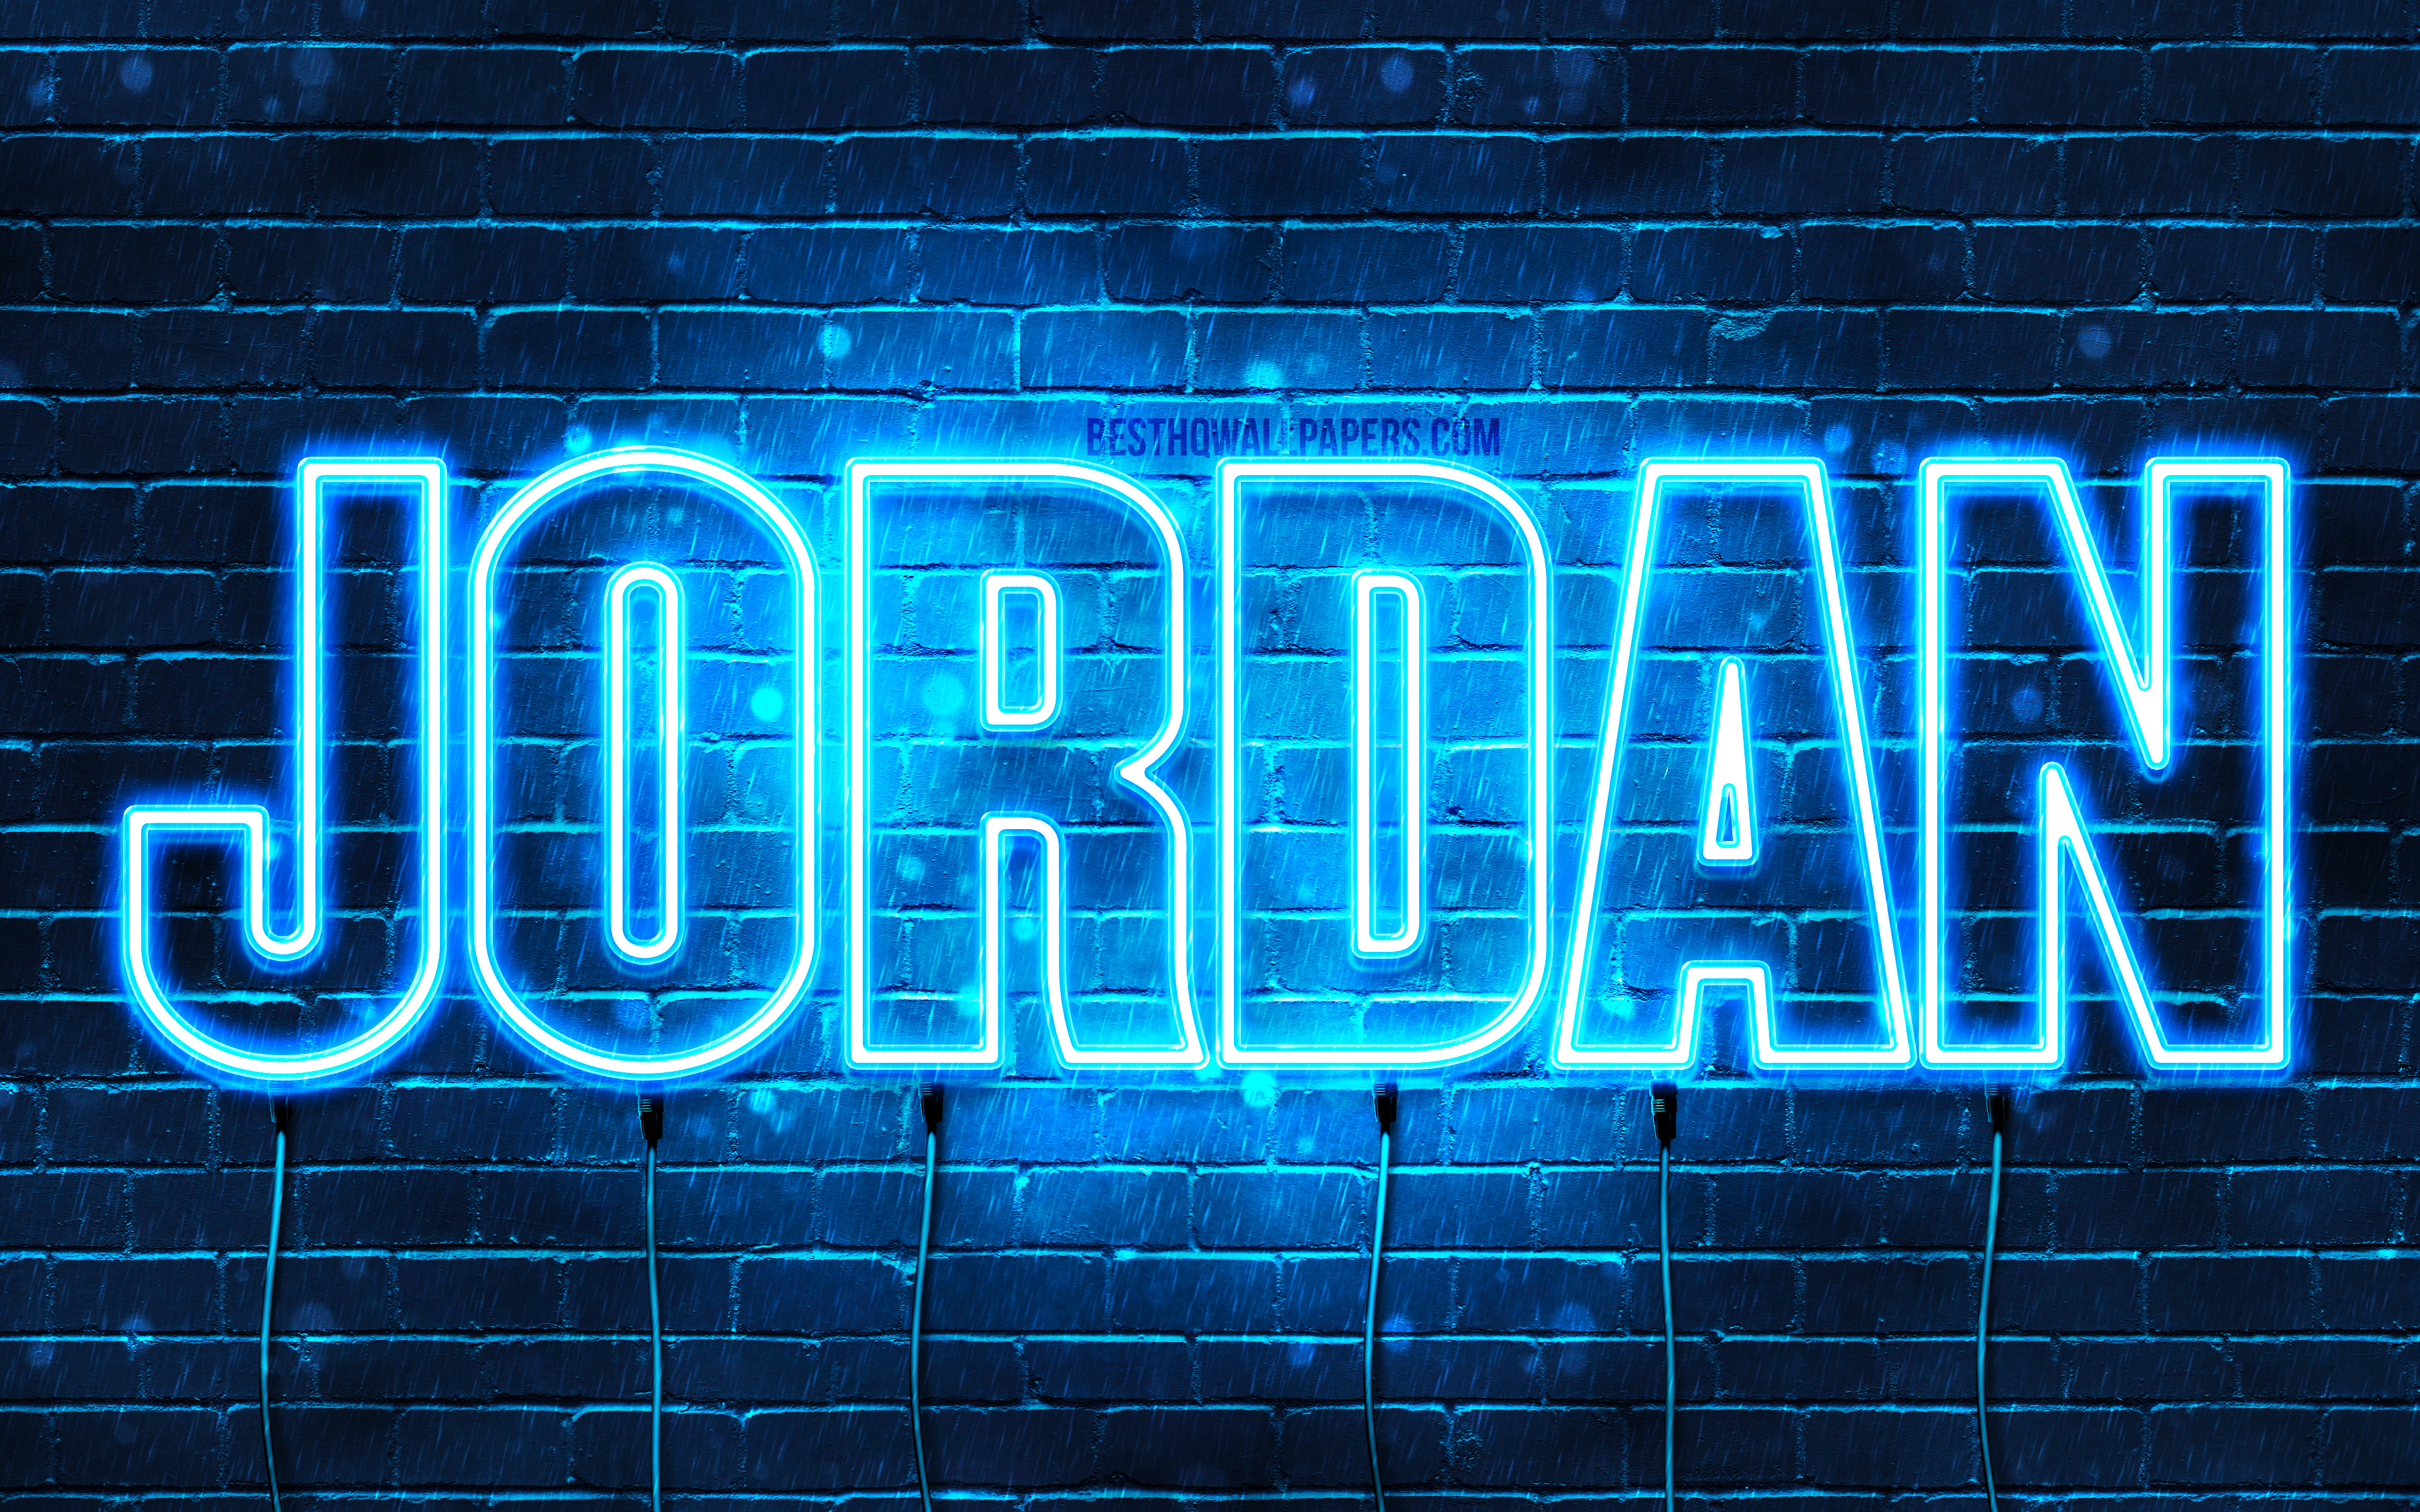 Download wallpaper Jordan, 4k, wallpaper with names, horizontal text, Jordan name, blue neon lights, picture with Jordan name for desktop with resolution 3840x2400. High Quality HD picture wallpaper